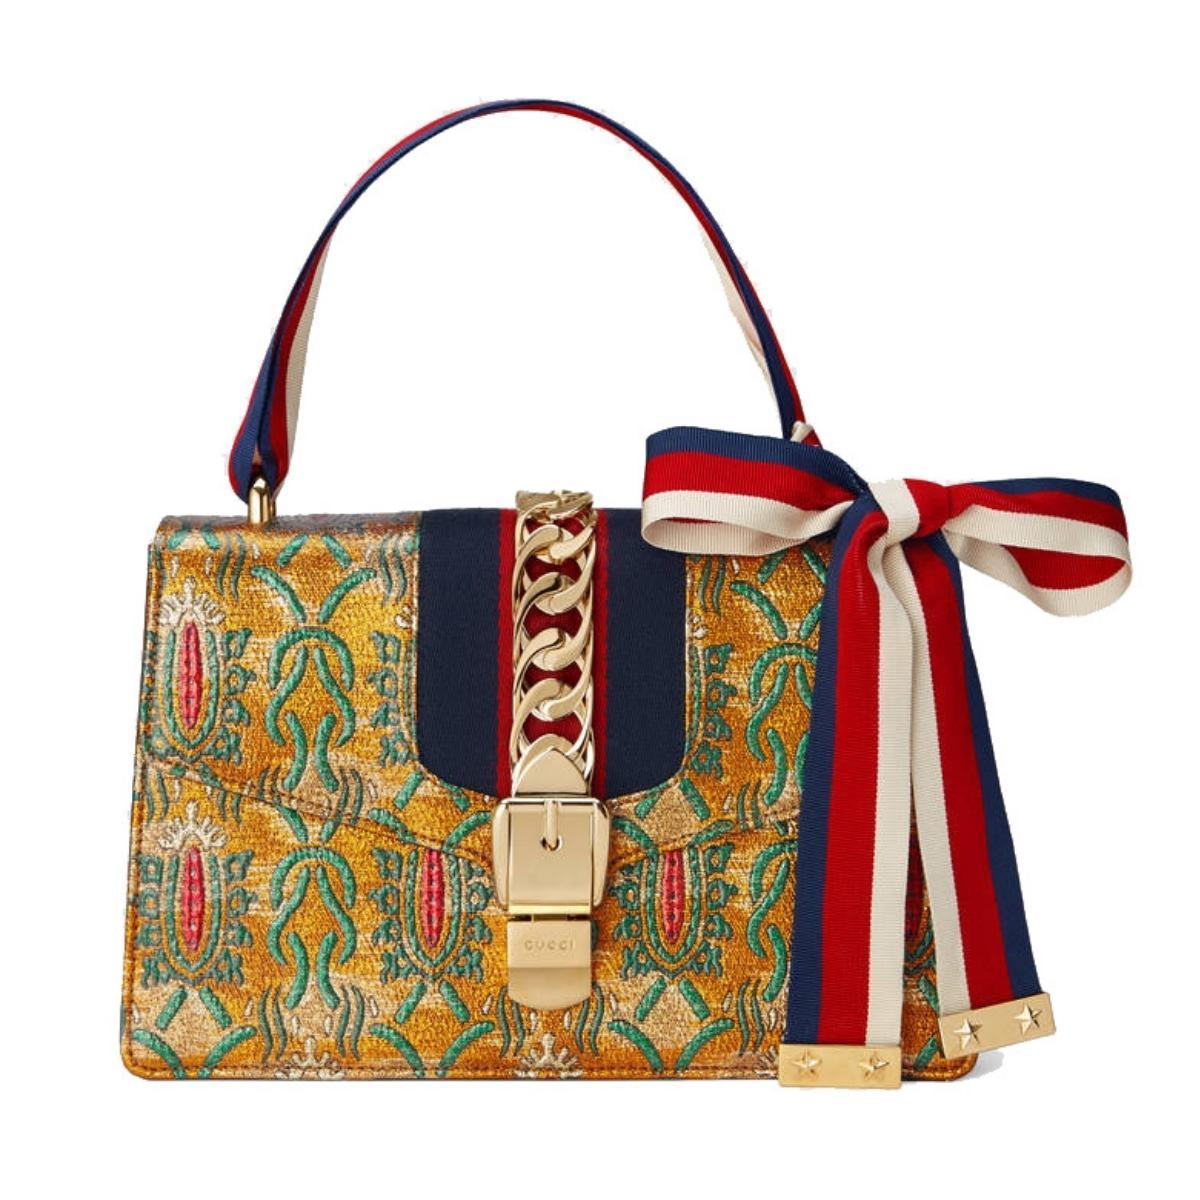 Gucci Sylvie Multicolor Brocade Bag In New Condition For Sale In Brossard, QC